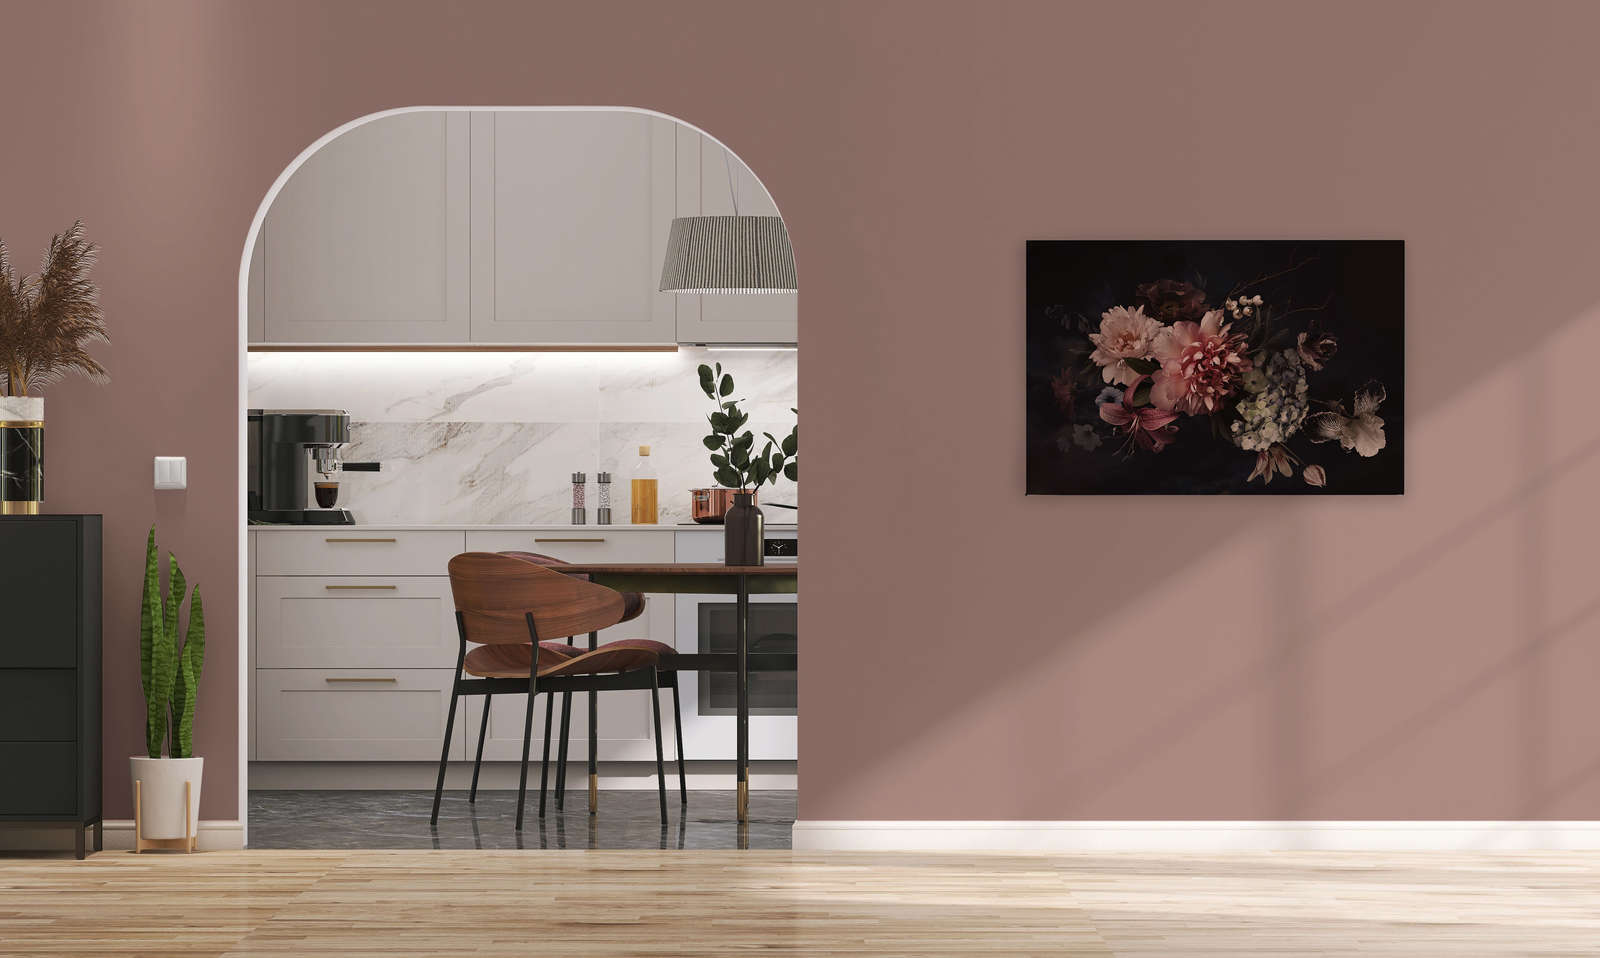             Canvas with Botanical-Style Bouquet | pink, black - 0,90 m x 0,60 m
        